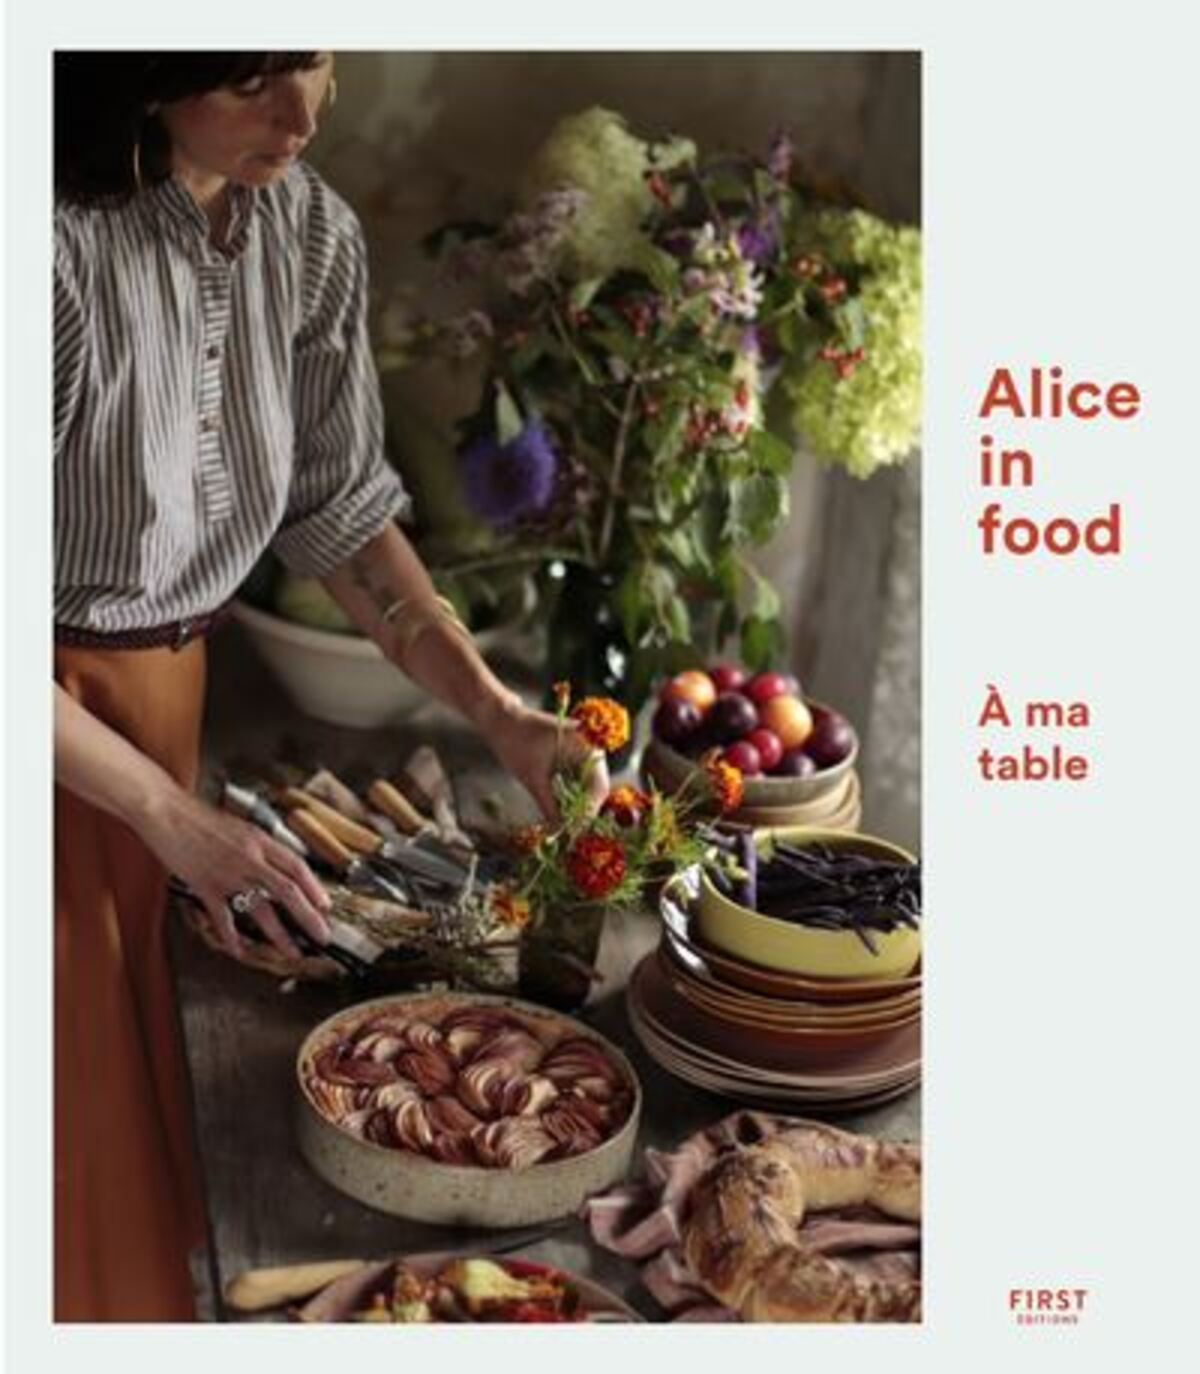 Alice-in-Food-A-ma-table